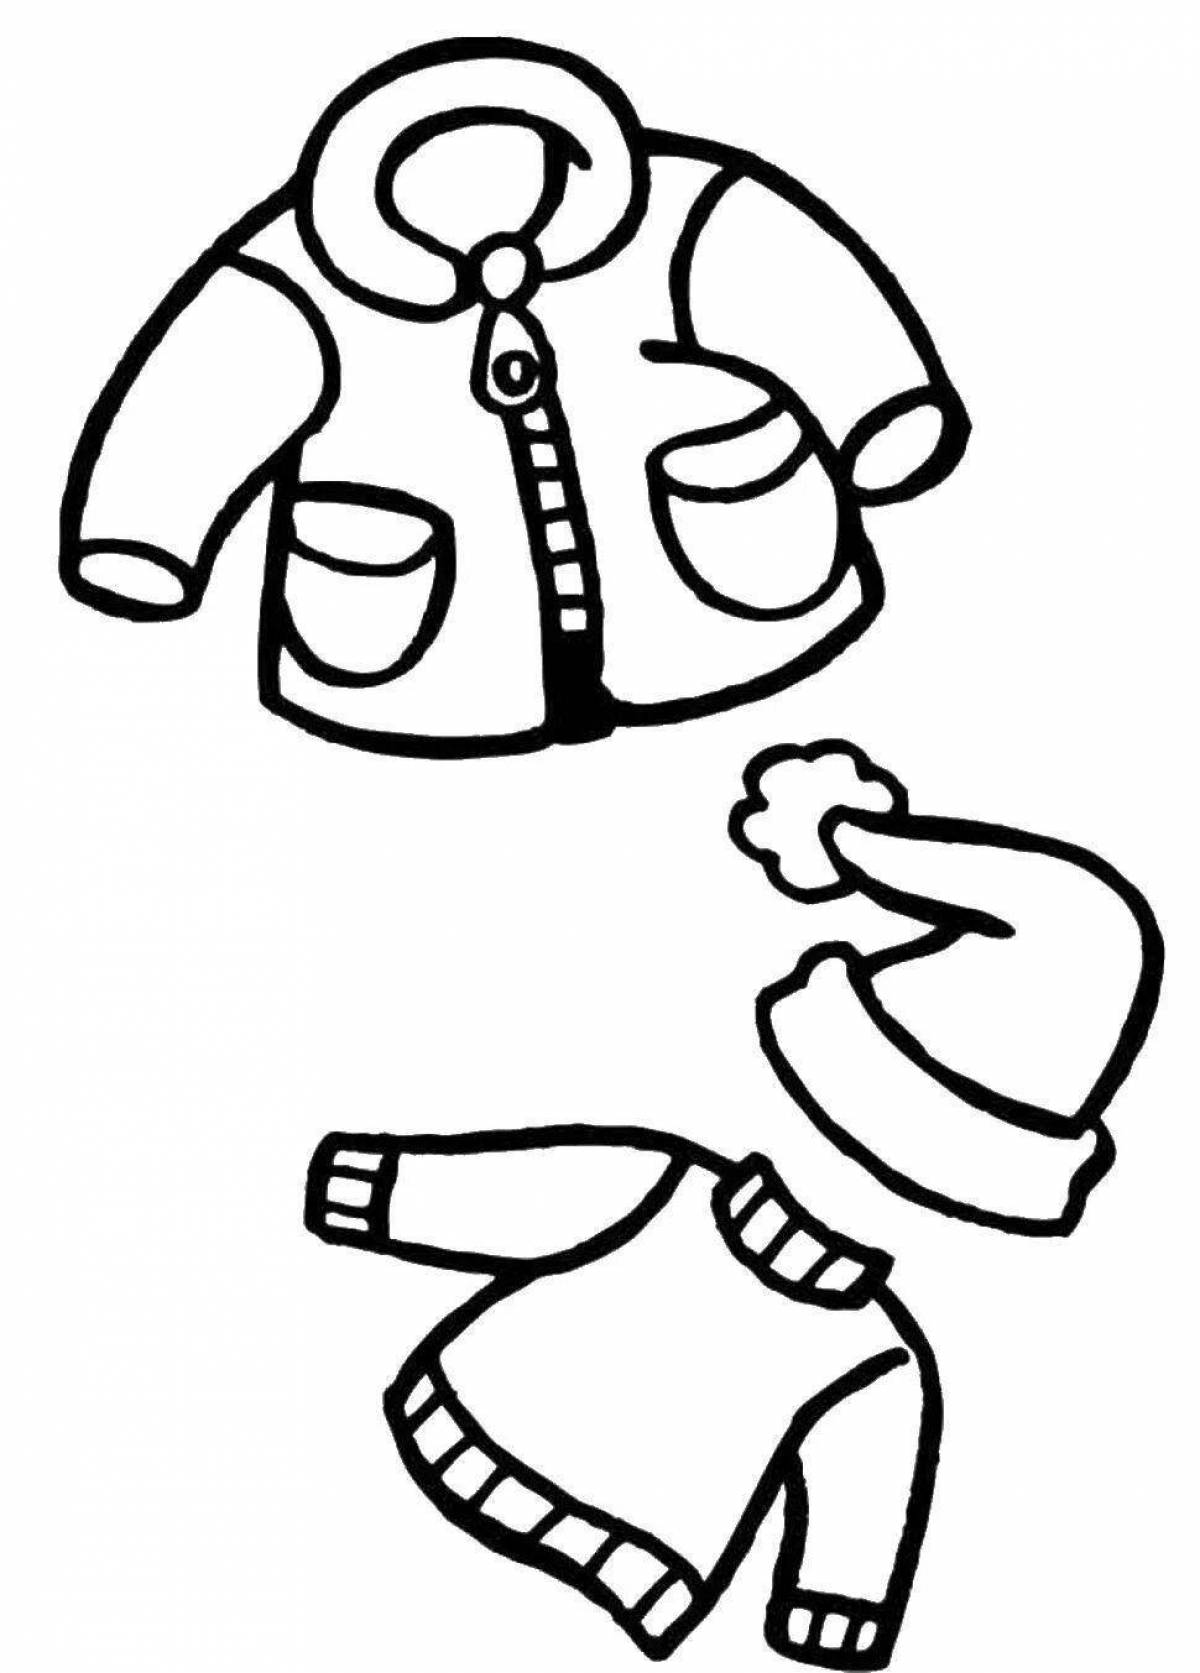 Colorful winter clothes coloring page for 6-7 year olds